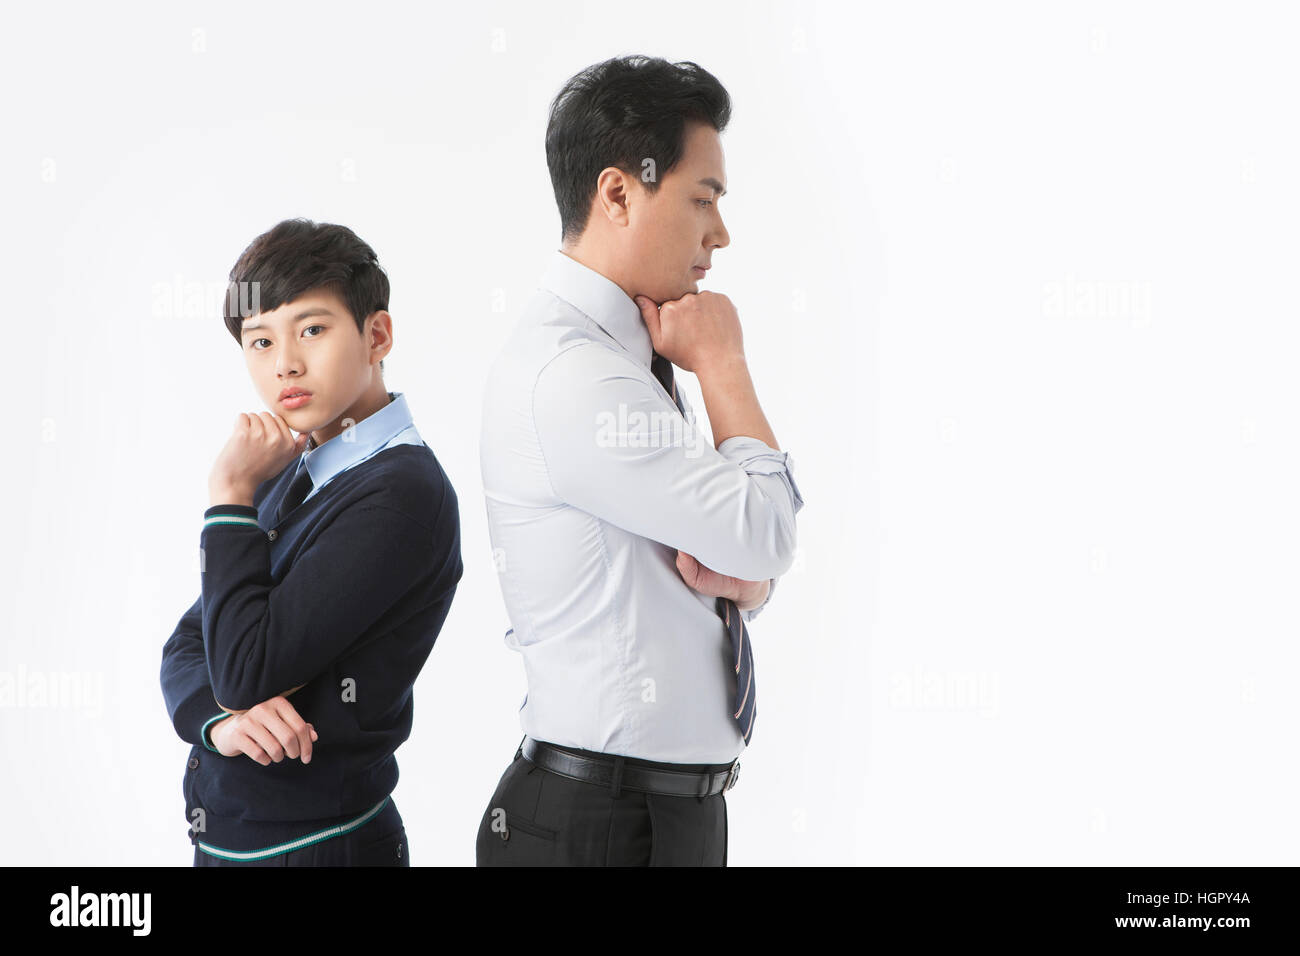 Side view of teacher and school boy worried Stock Photo